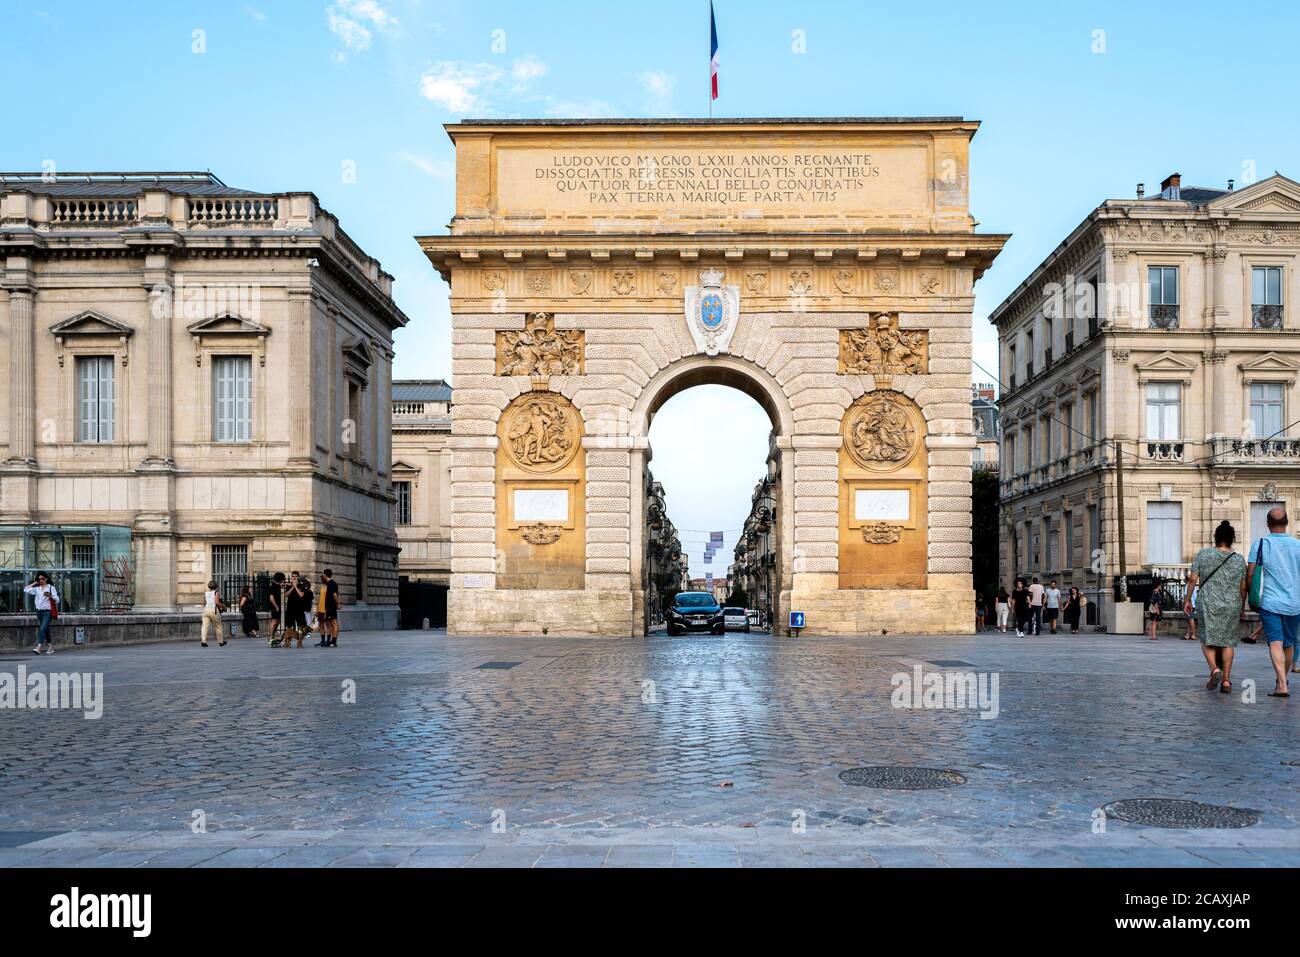 Montpellier, France- July 26th 2019: Triumphal Arch Porte du Peyrou in Montpellier, France during a summer late afternoon. Stock Photo